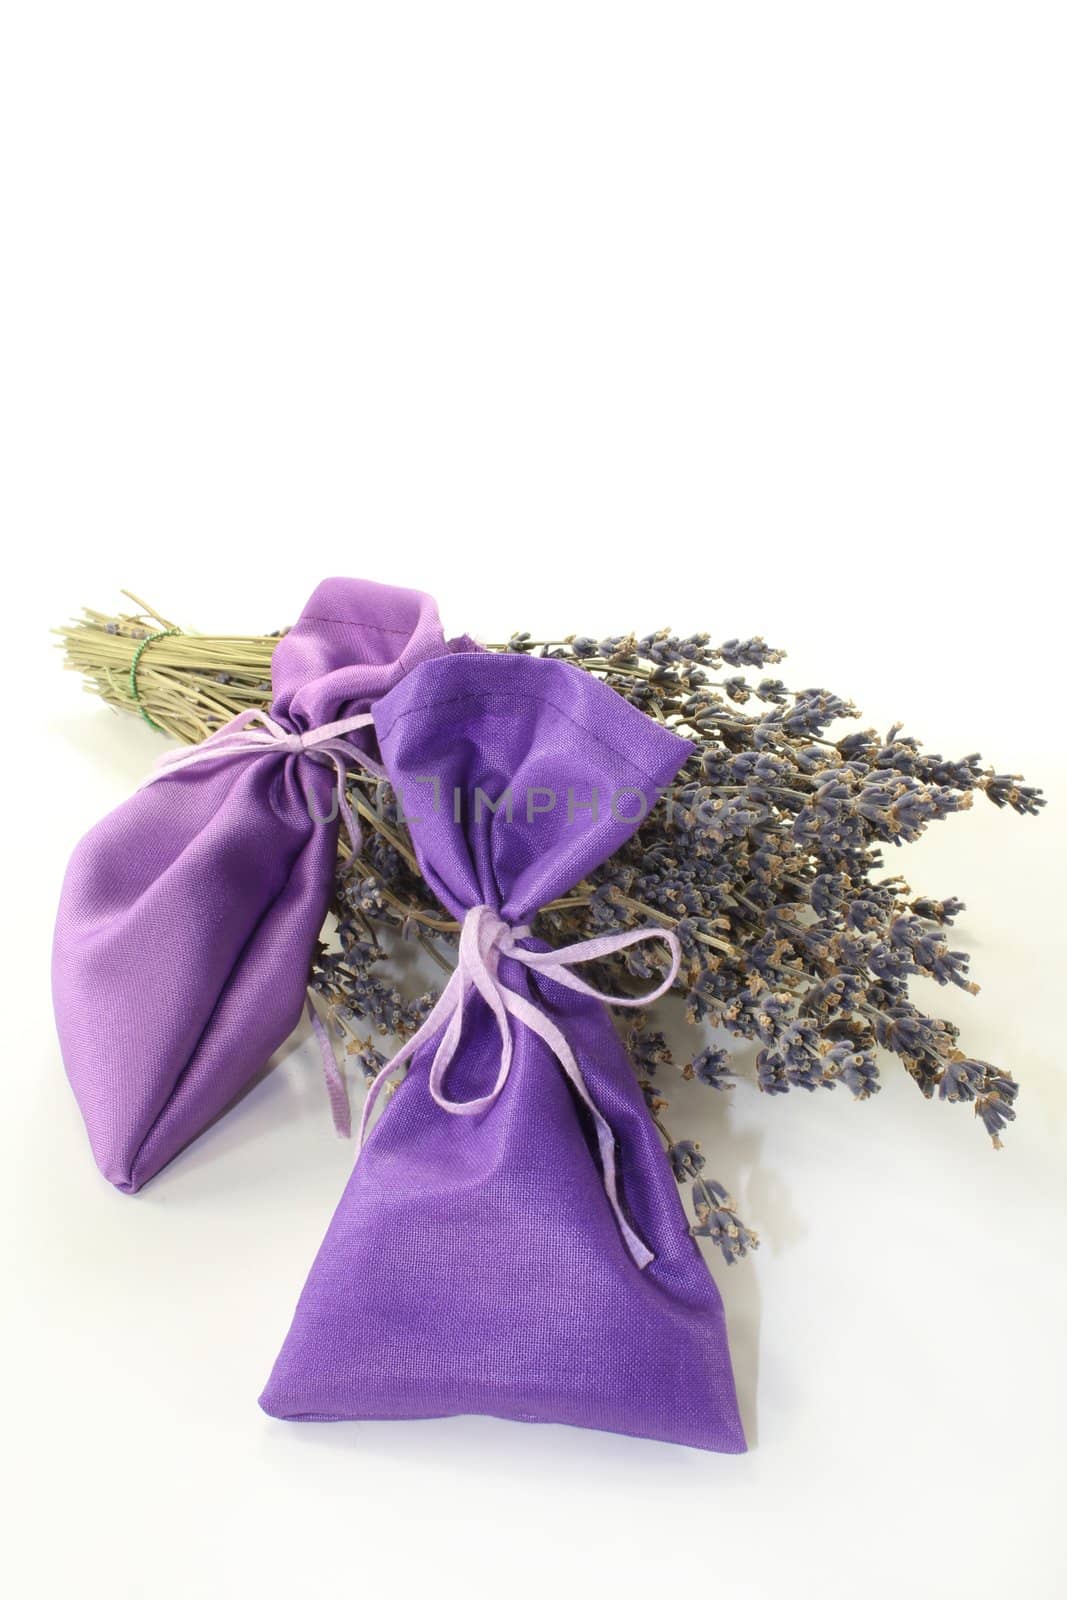 dried lavender flowers and lavender bags against white background